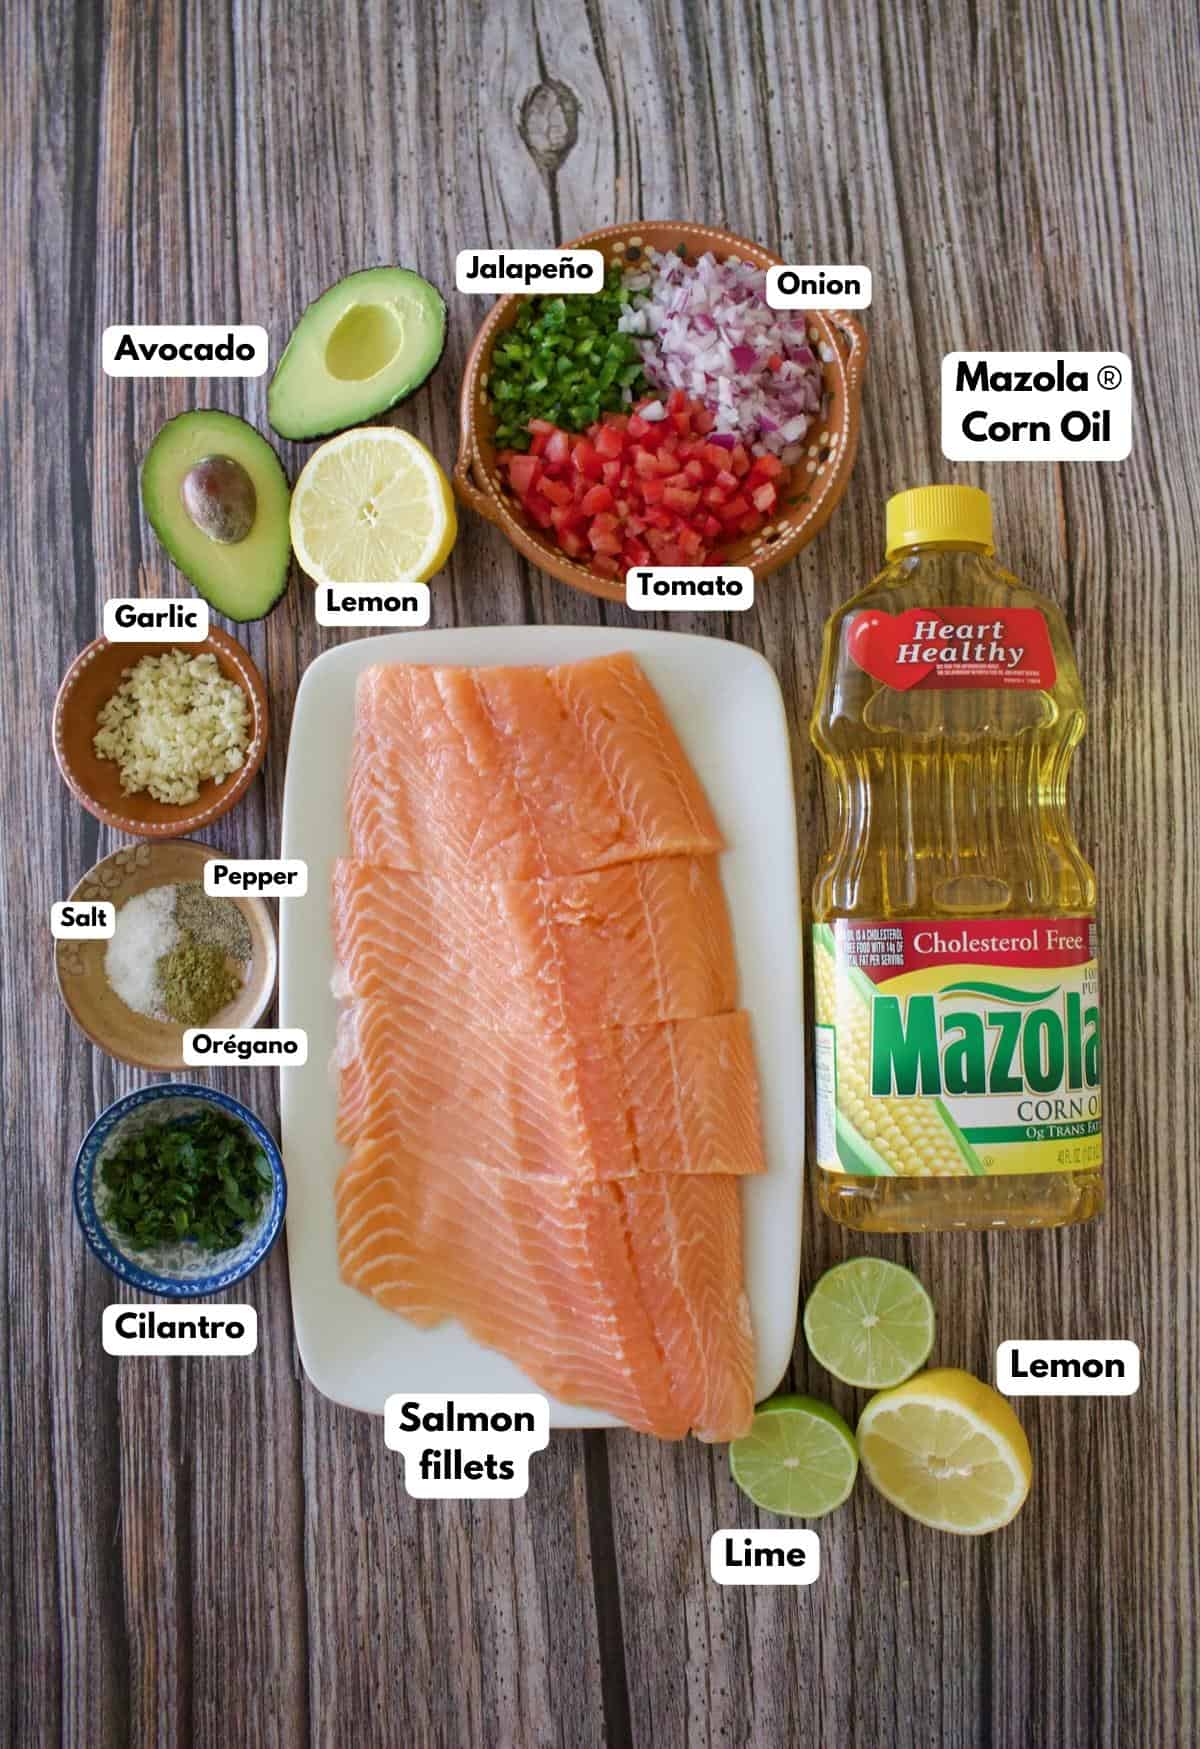 The ingredients needed to make the recipe labeled and sitting on a wooden surface.